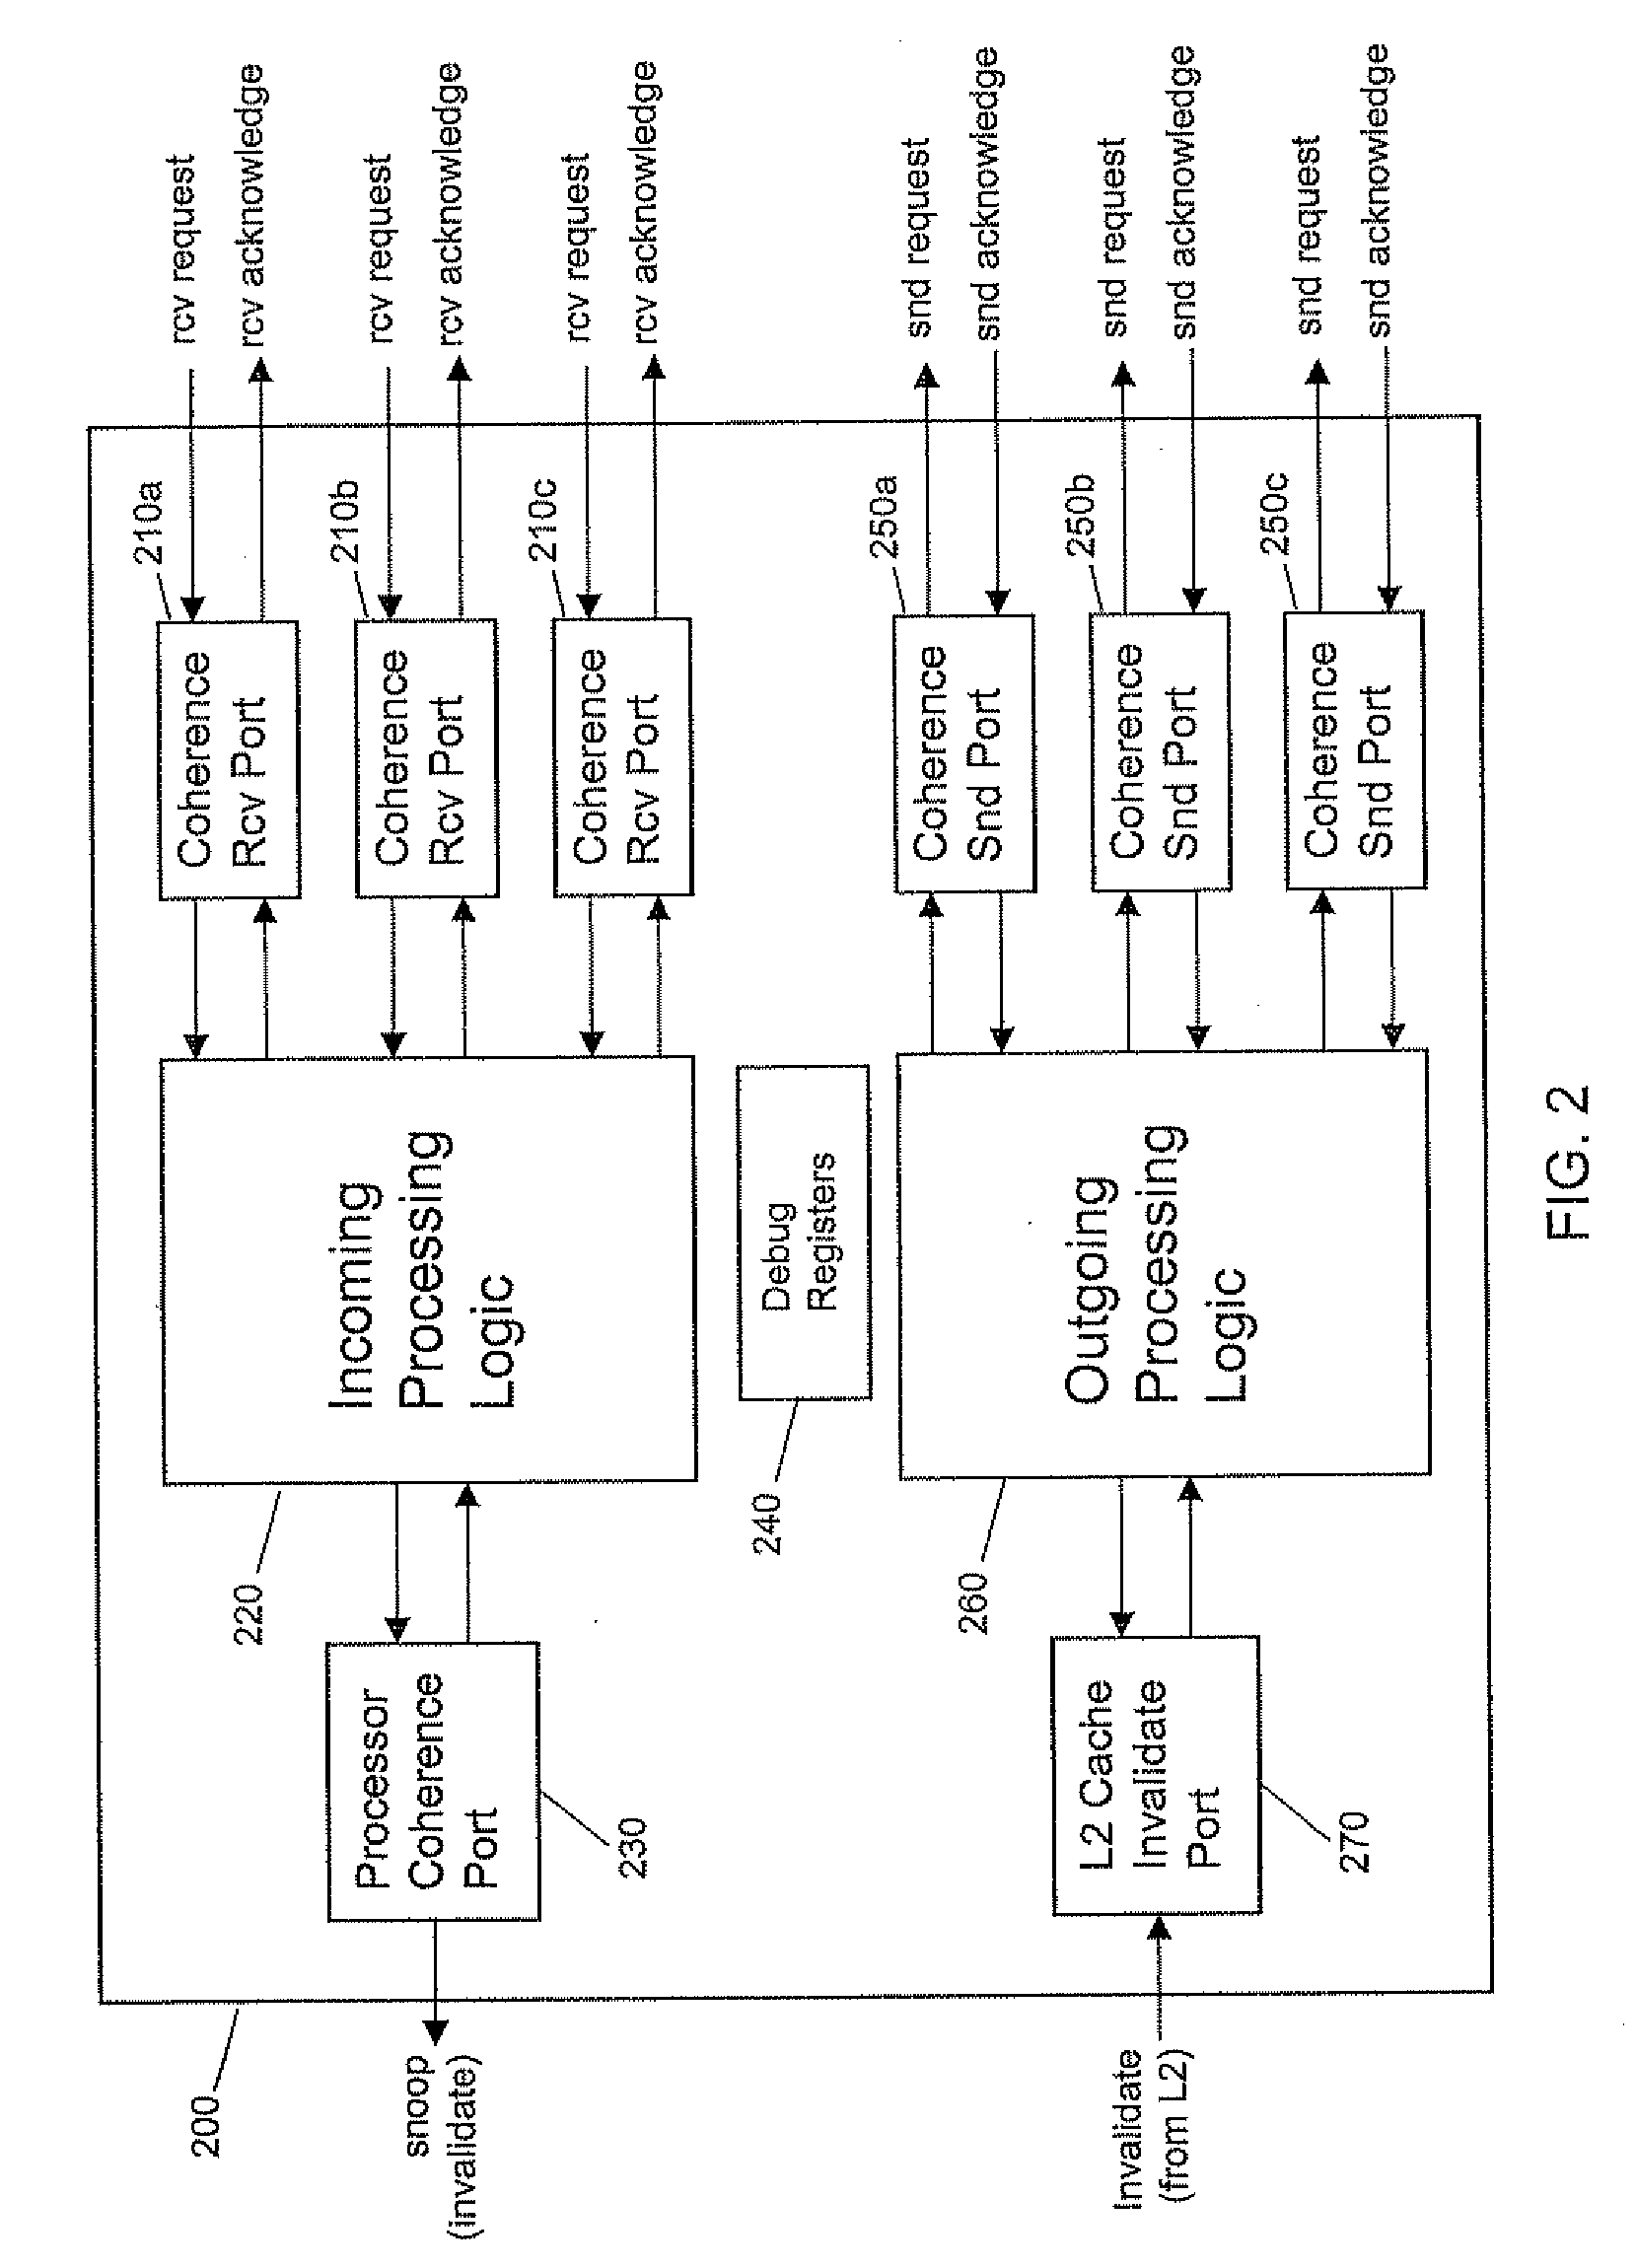 Method and apparatus for single-stepping coherence events in a multiprocessor system under software control